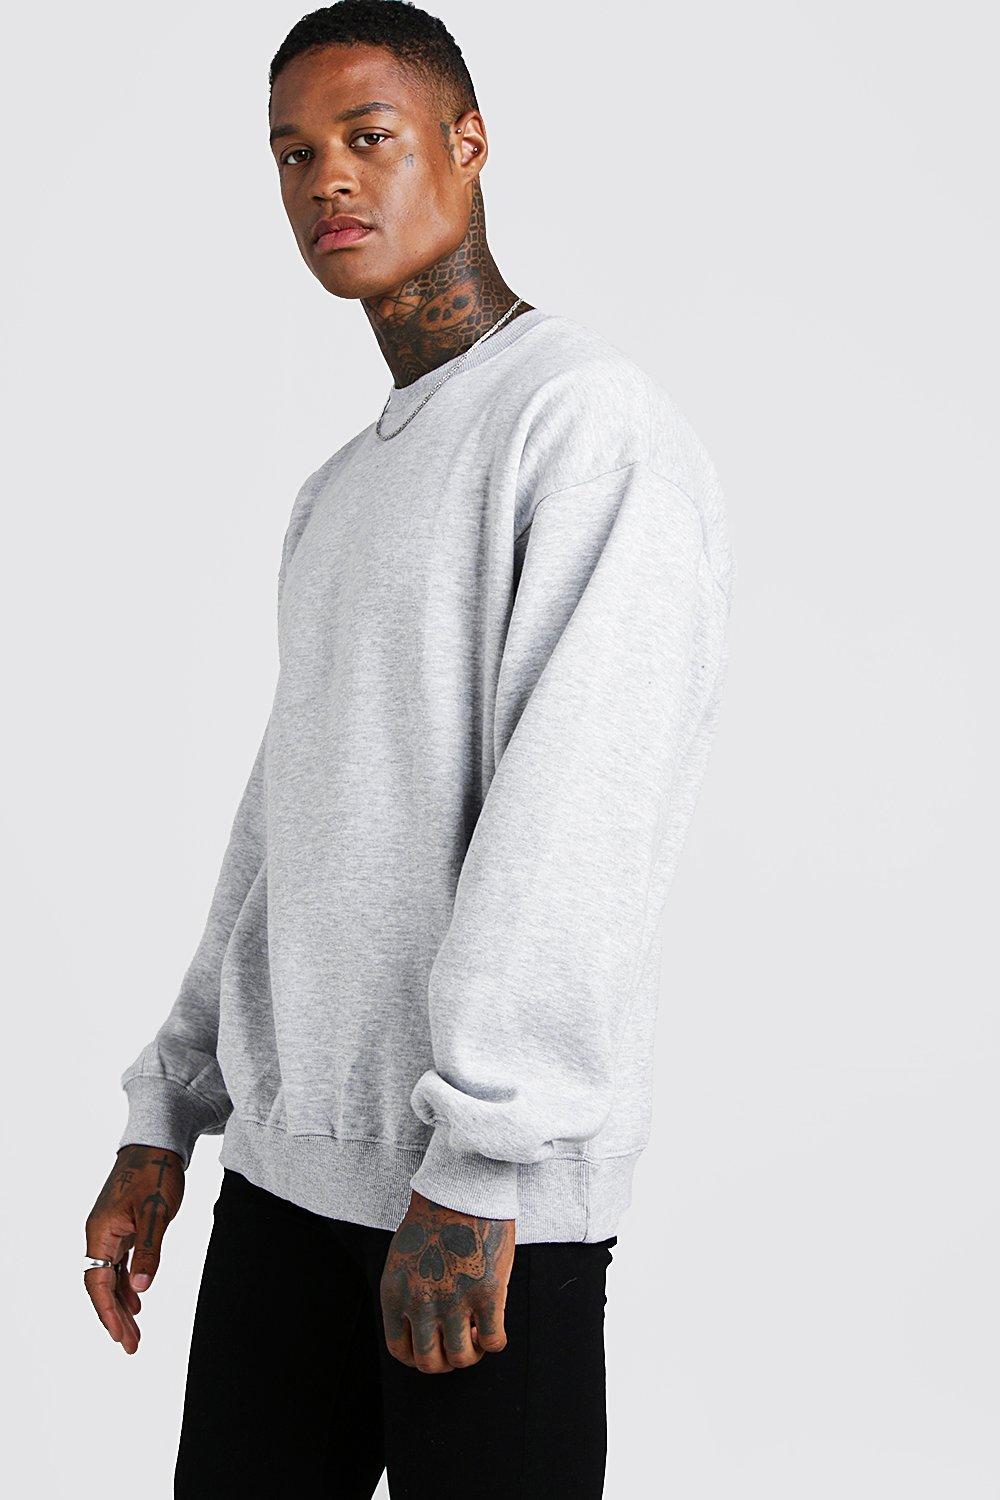 【LANDS' END】over size crew neck sweat